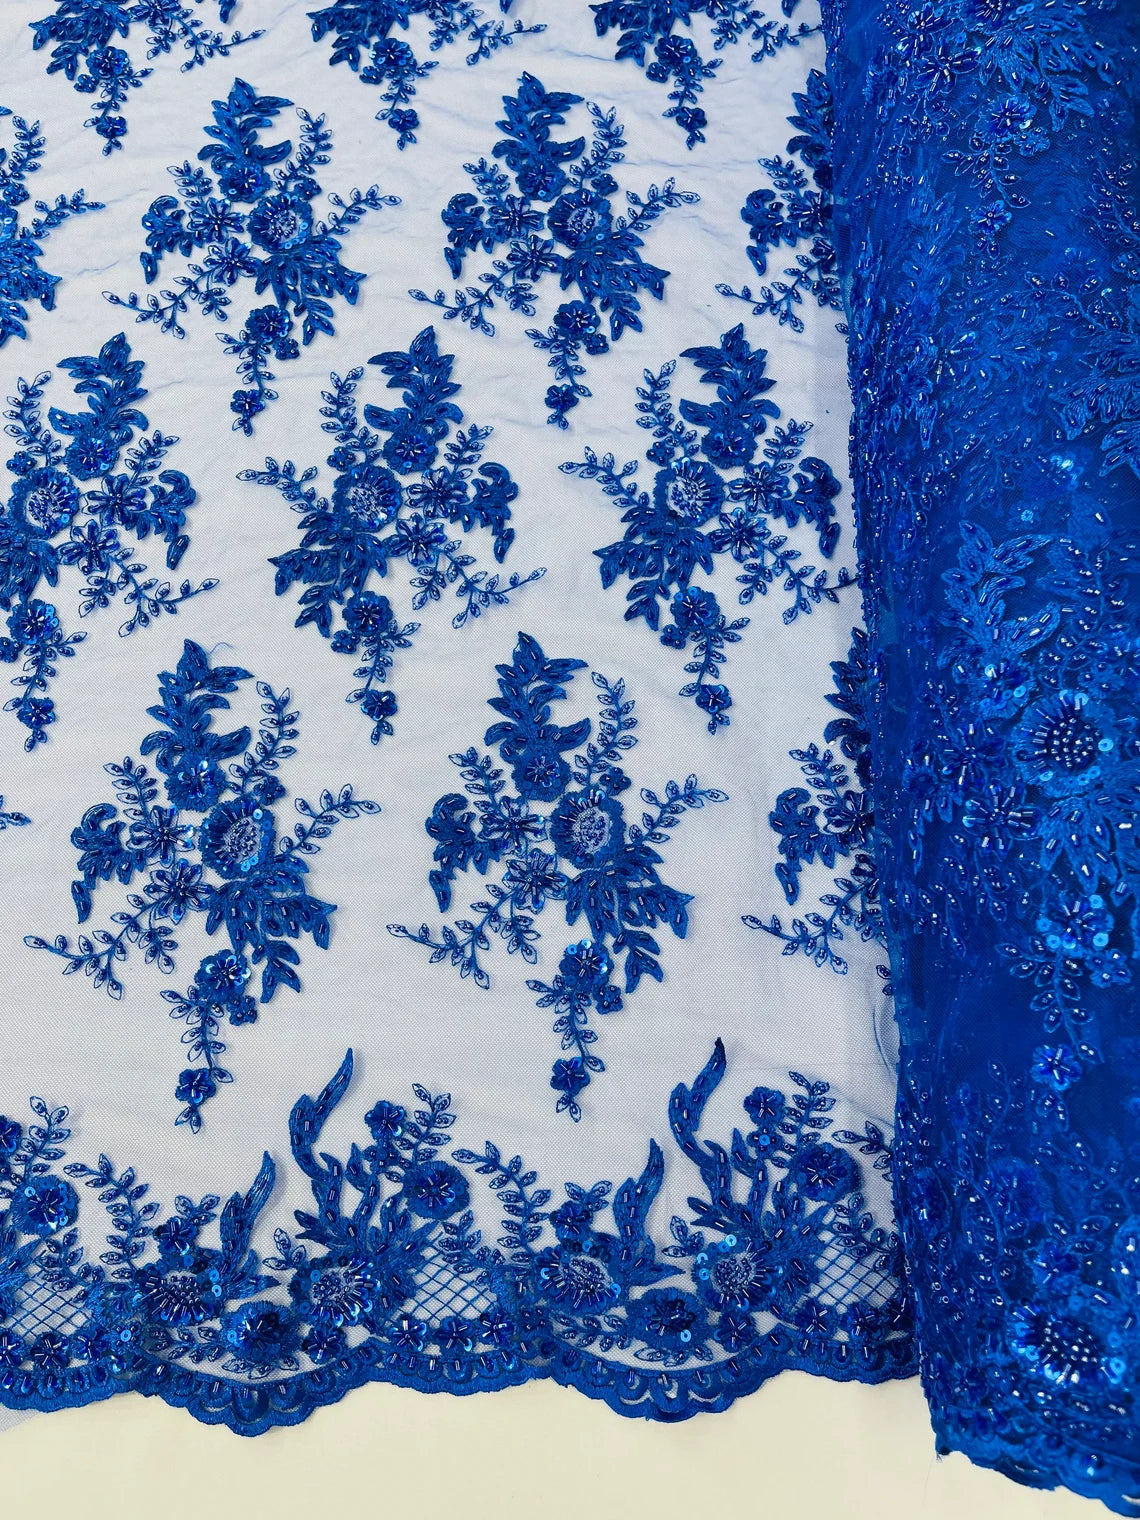 Floral Leaf Bead Sequins Fabric - Royal Blue - Embroidered Flower and Leaves Design Fabric By Yard